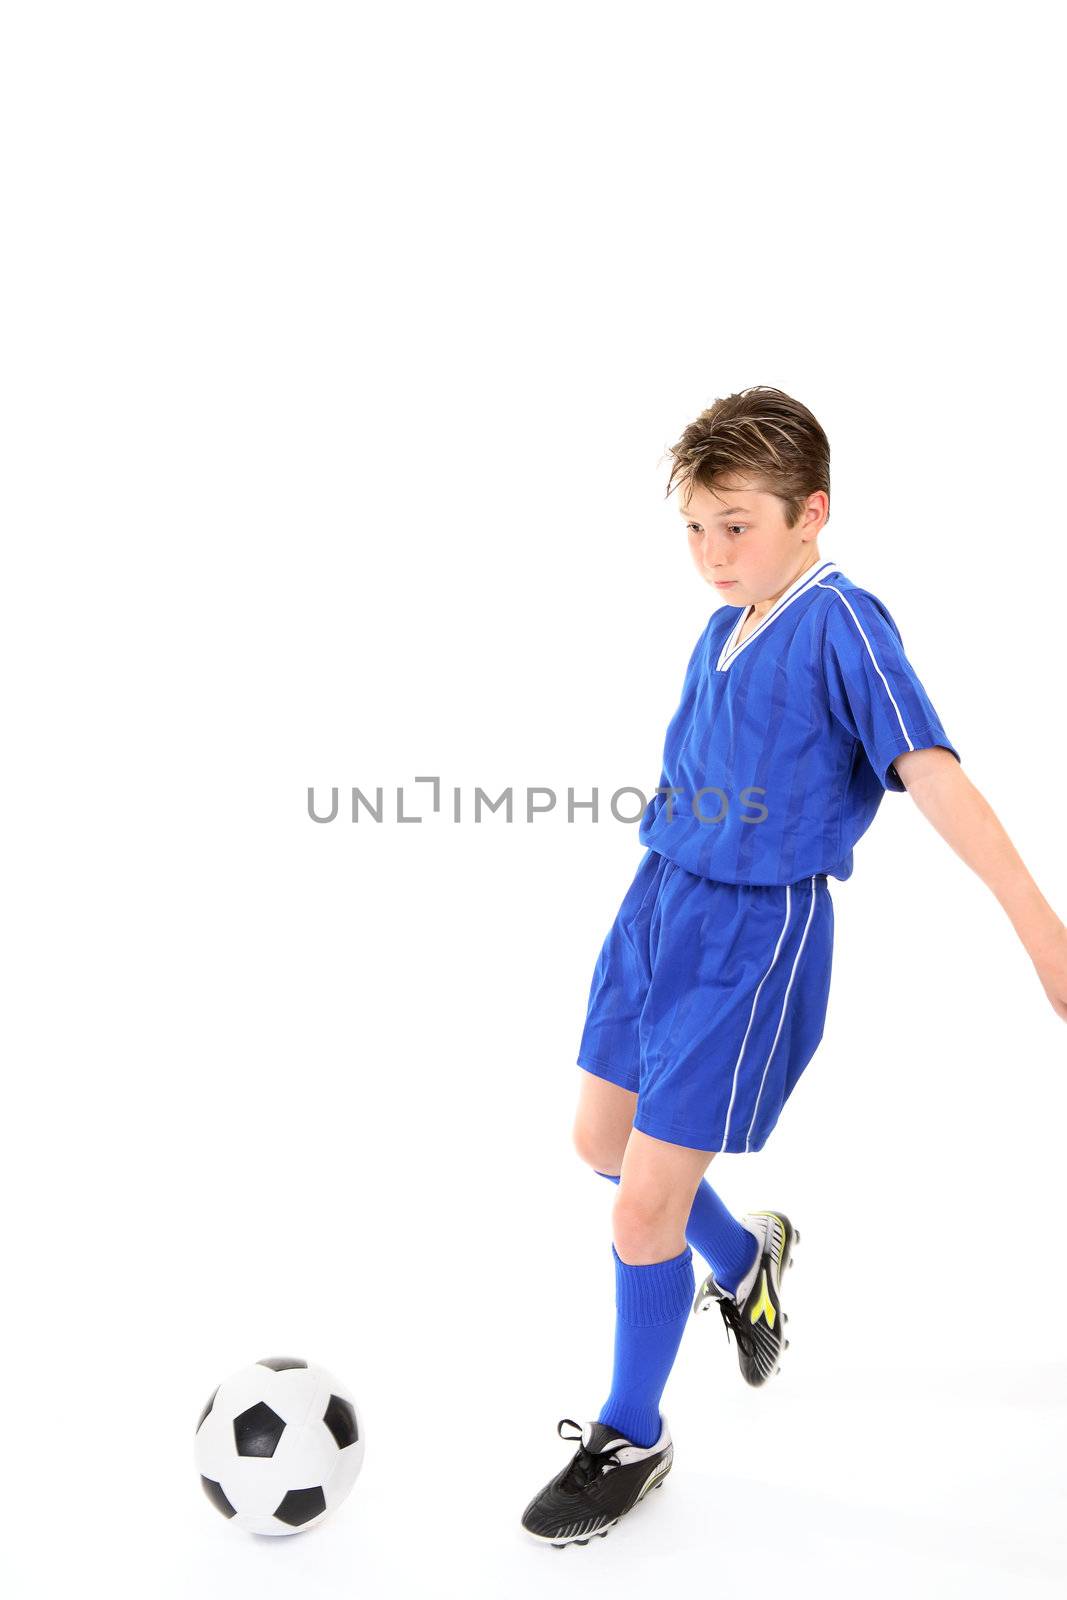 Child playing soccer by lovleah